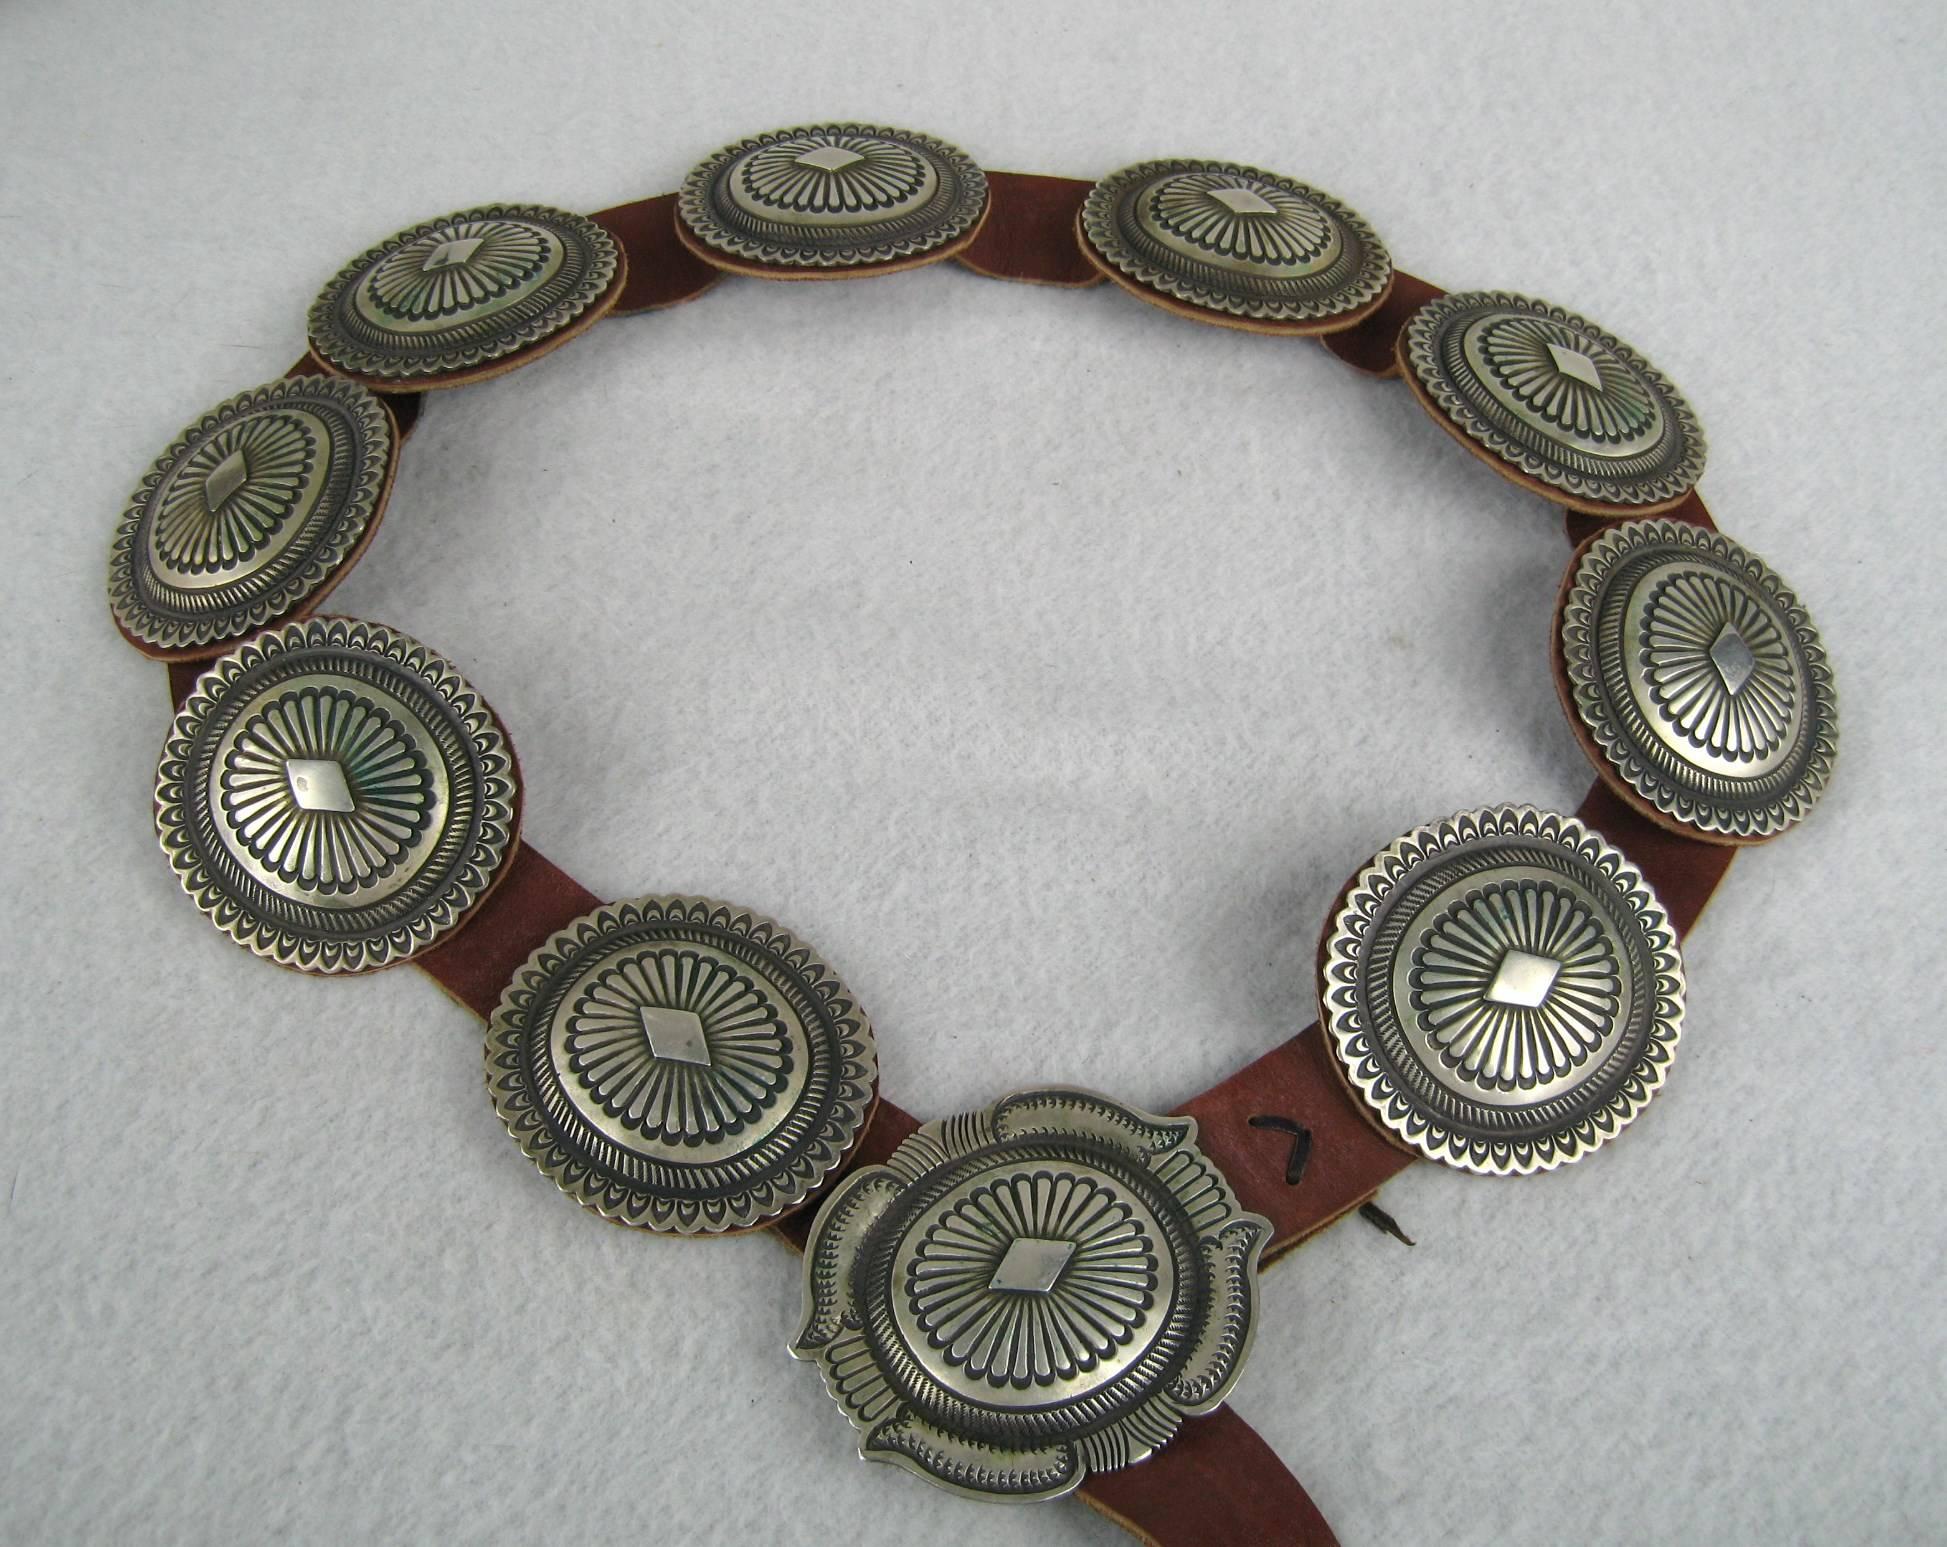 Stunning Navajo Concho Belt with 9 Concho's  and a Large Belt Buckle. Expertly Hand made by a Navajo silversmith. measuring 2.72 in  x 2.88 in. belt buckle 3.39 in wide x 2.89 in, Belt is 51 inches long. Belt holes start at 30 to 33 inches. Can be